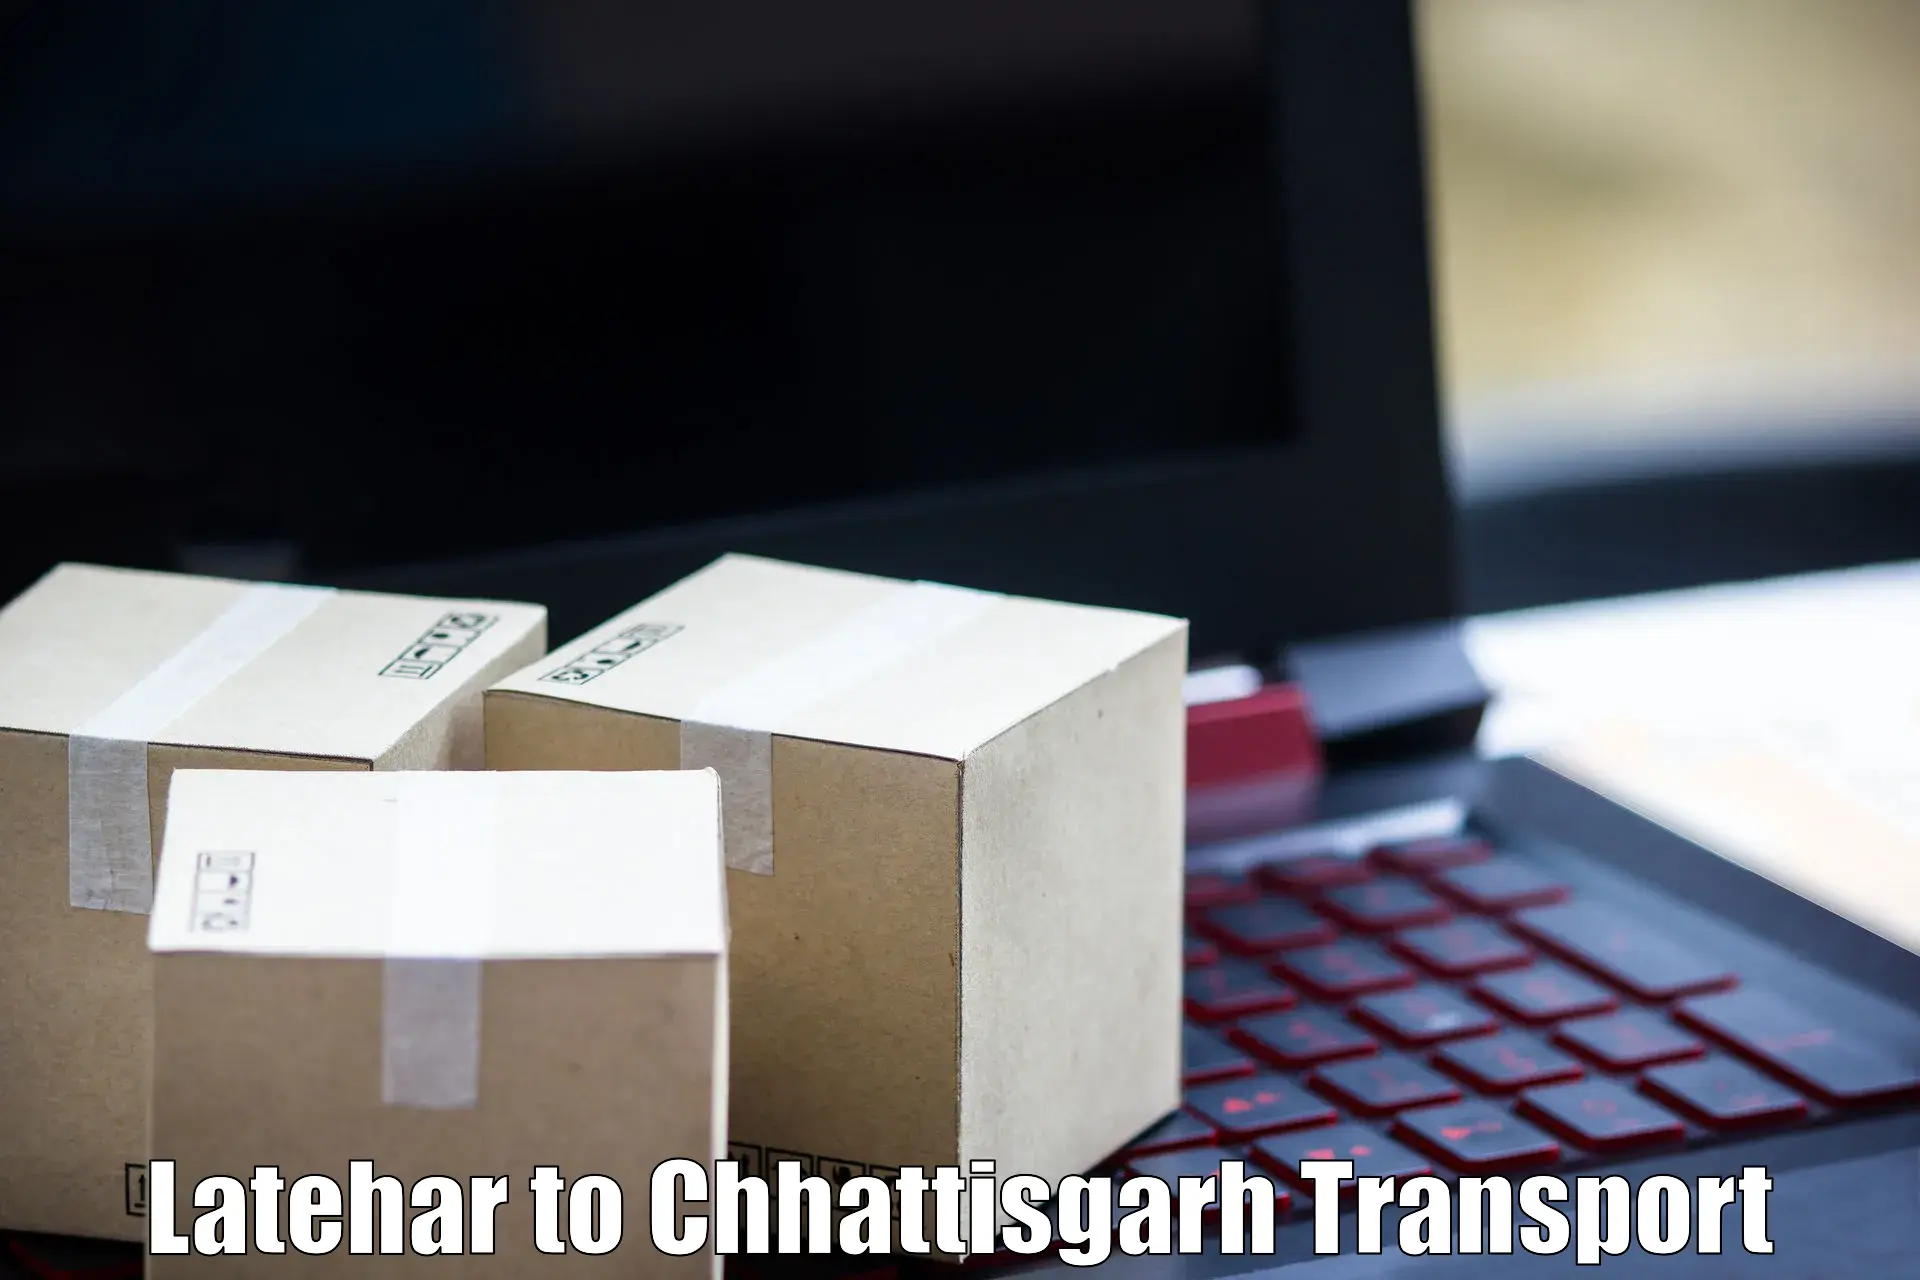 Container transport service Latehar to Ratanpur